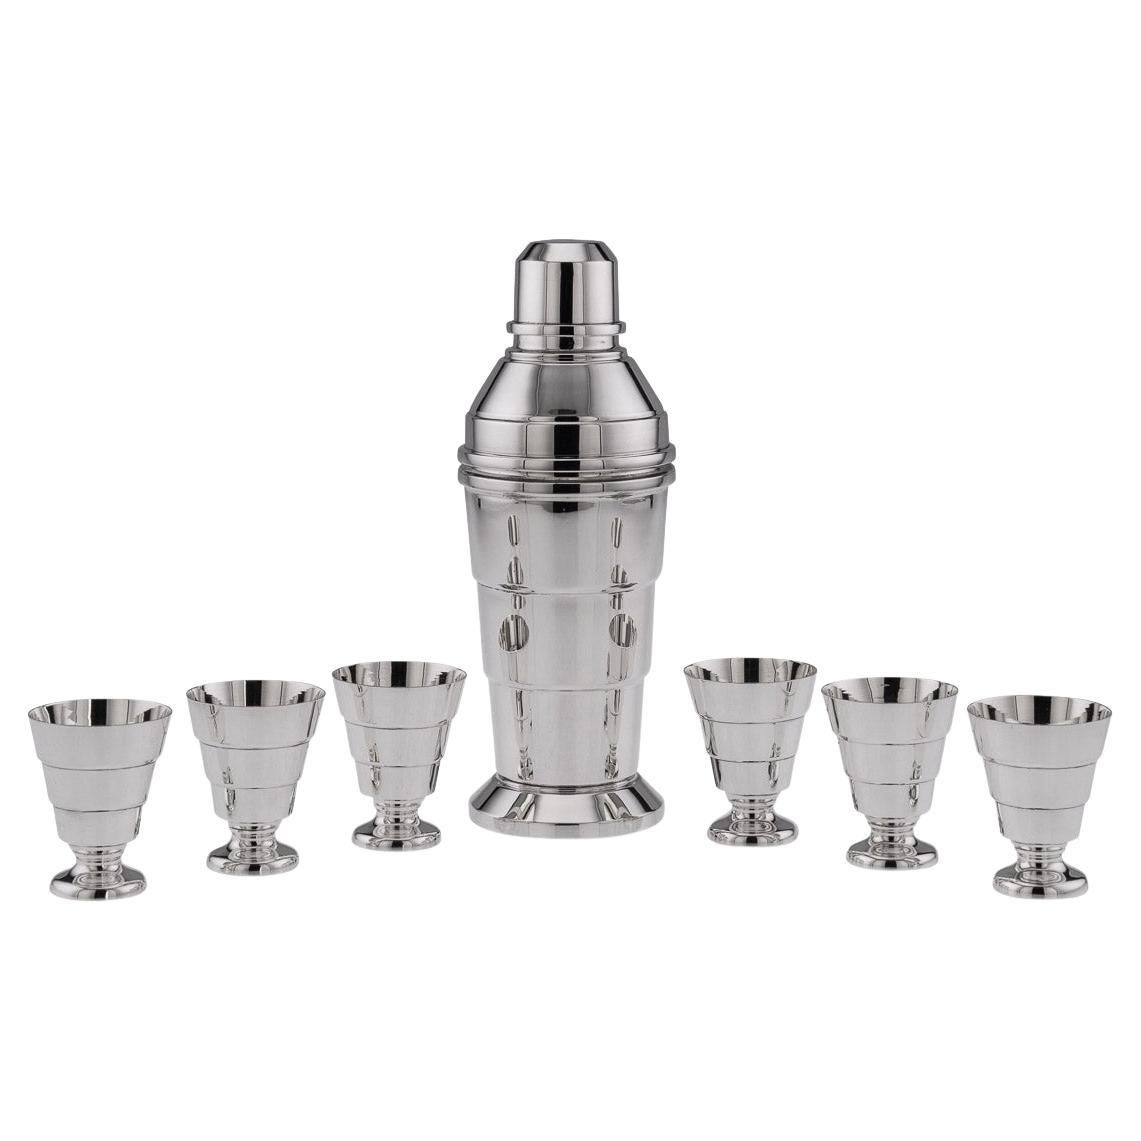 20th Century English Art Deco Solid Silver Cocktail Shaker & Beakers, c.1935